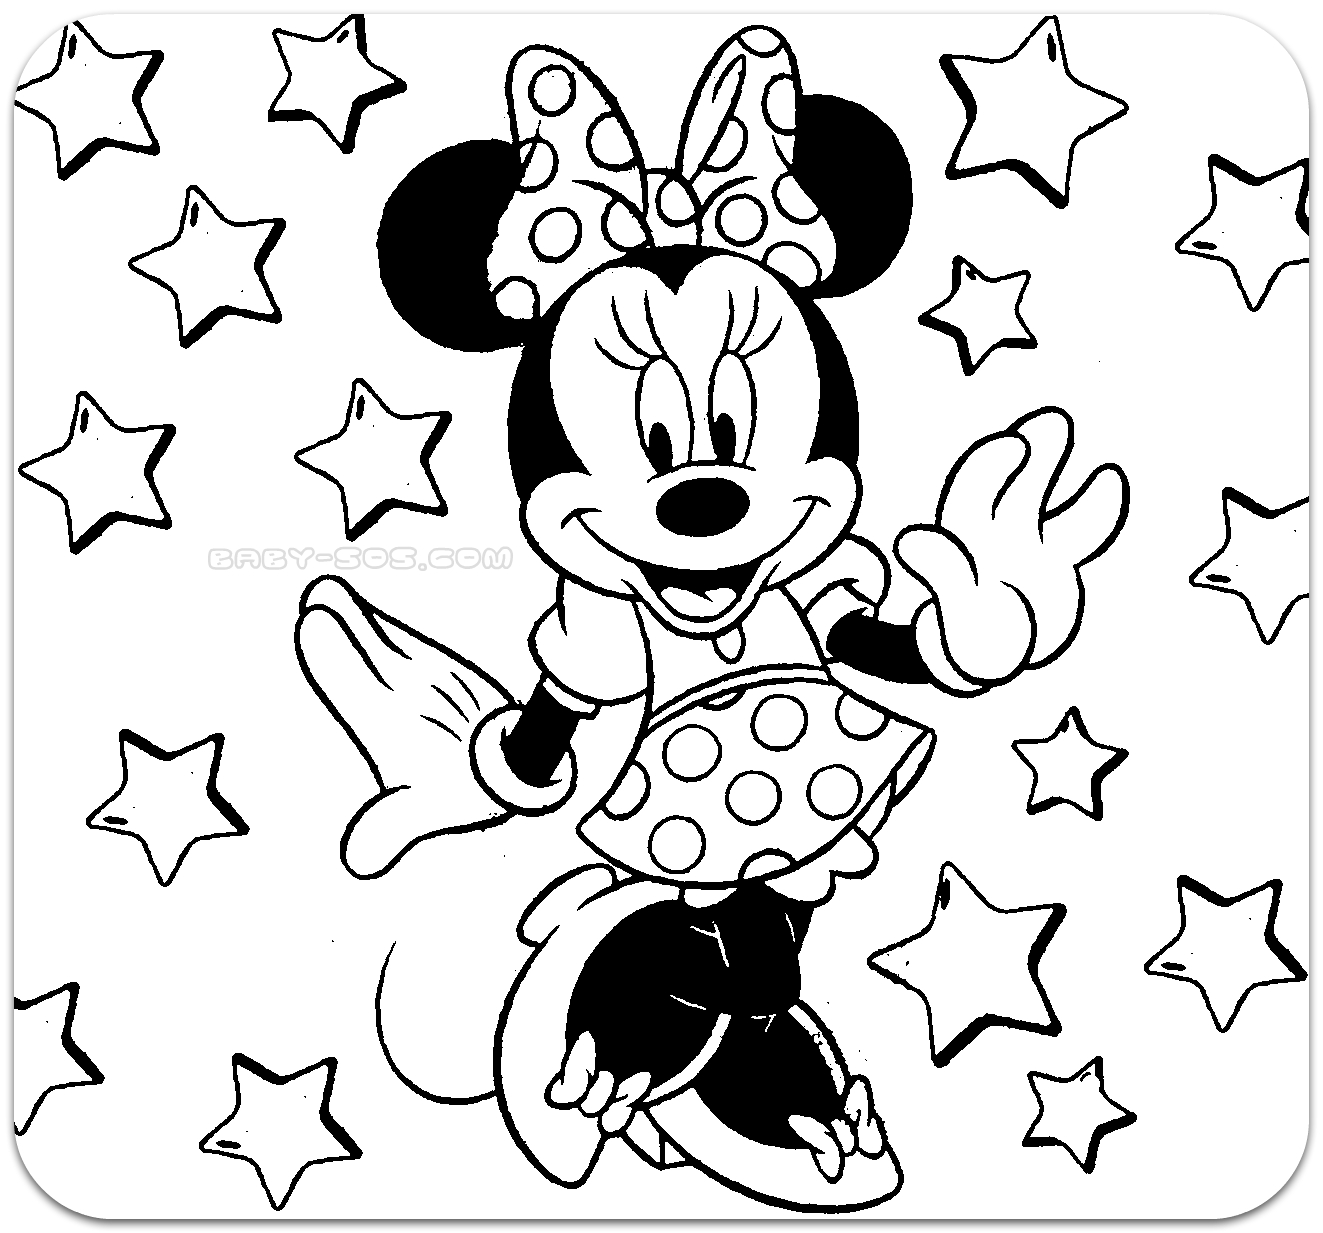 Coloring for kids, Disney, Mickey Mouse, Maysa mine, guffі, coloring